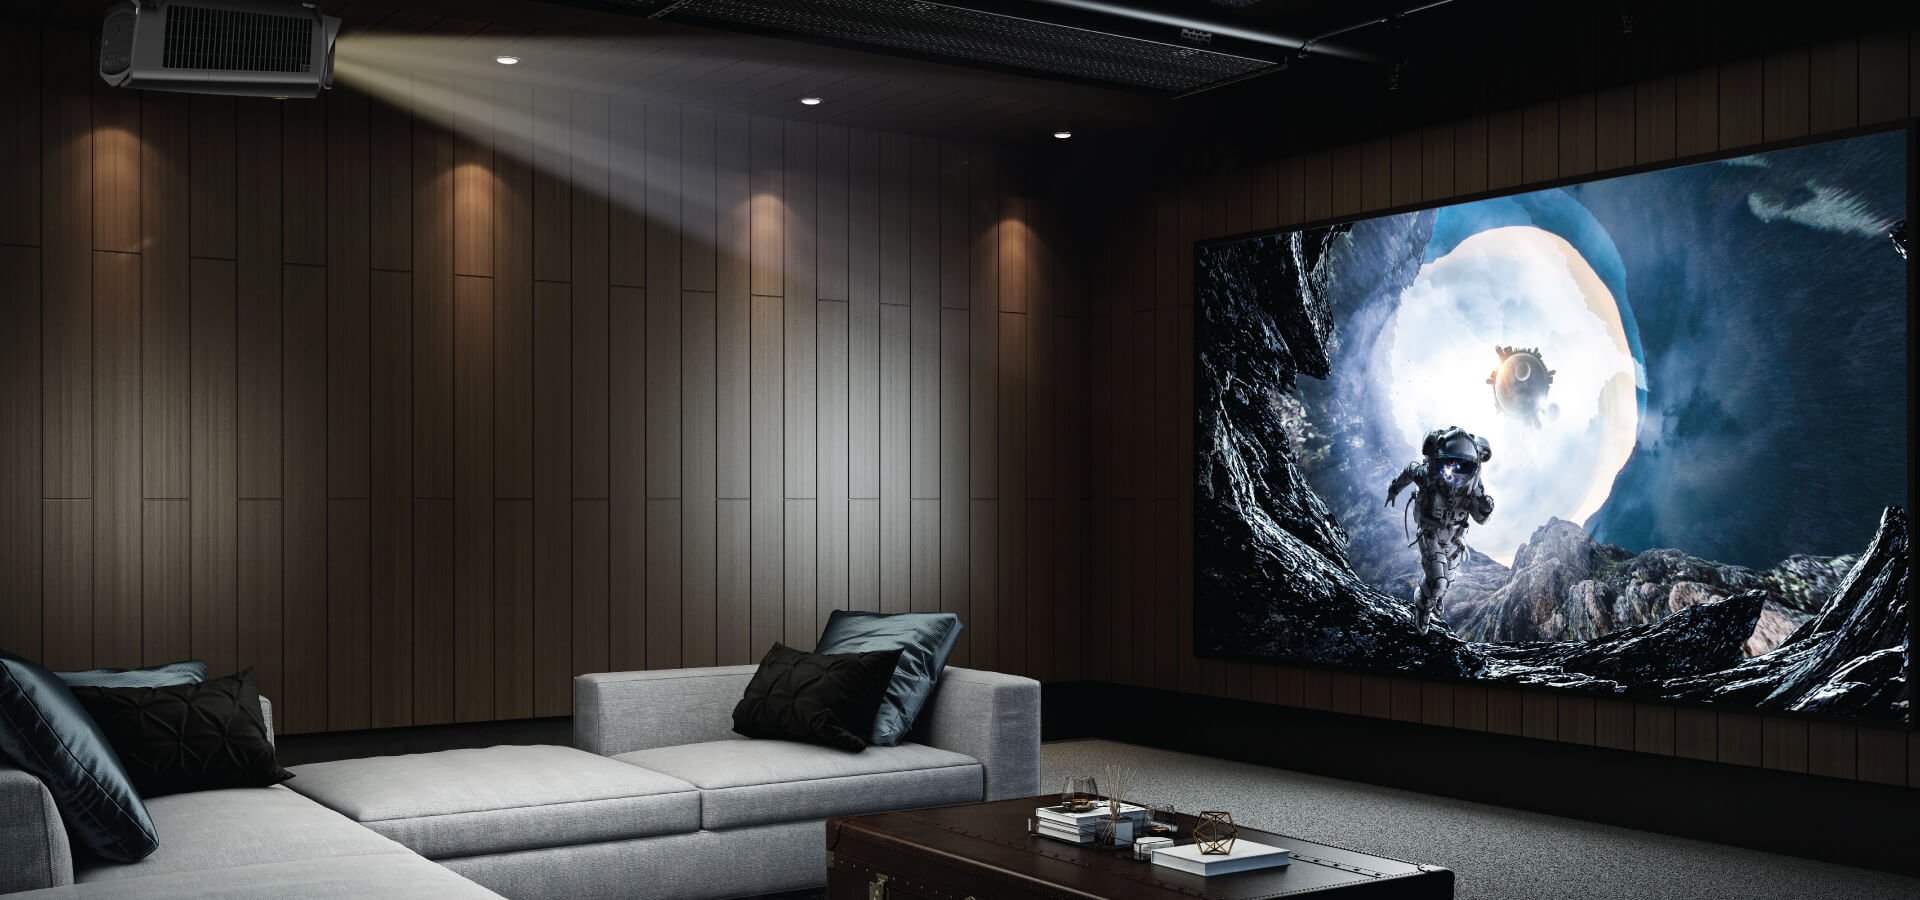 BenQ Dolby Atmos Krix IW-50 714 Projection System